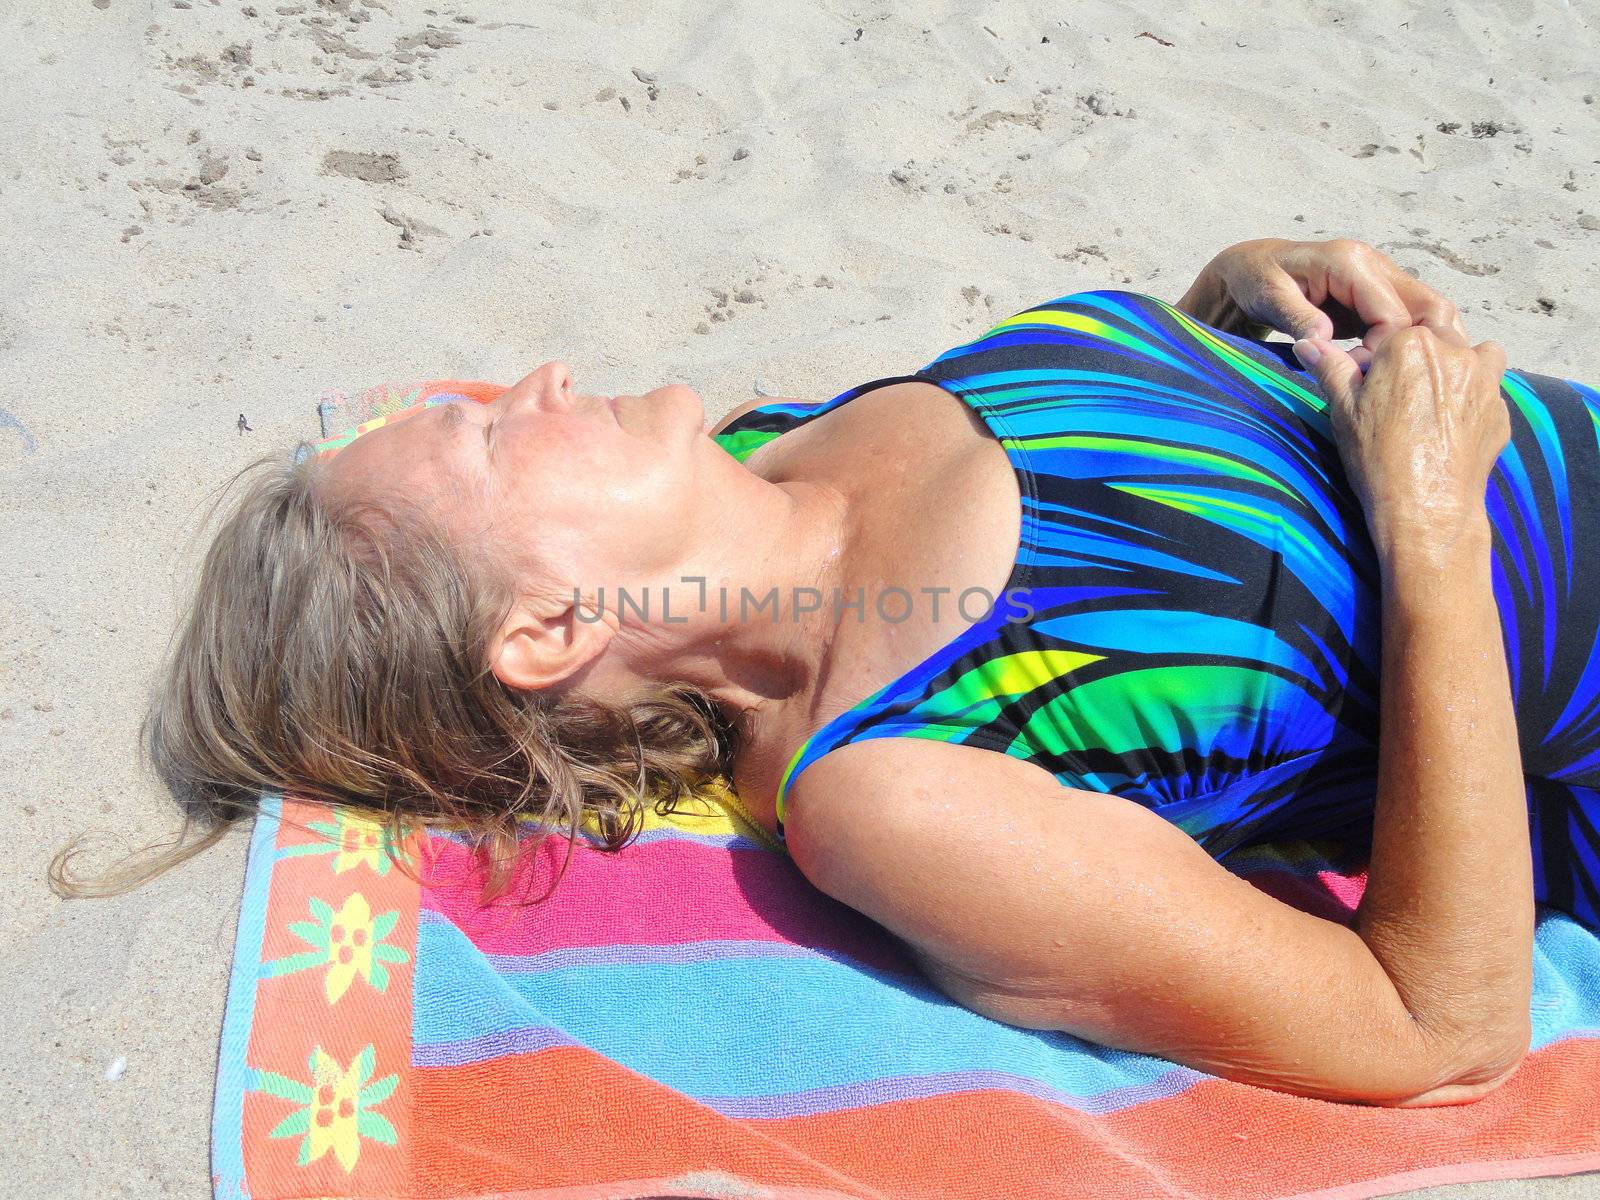 Mature female beauty on vacation at the beach.